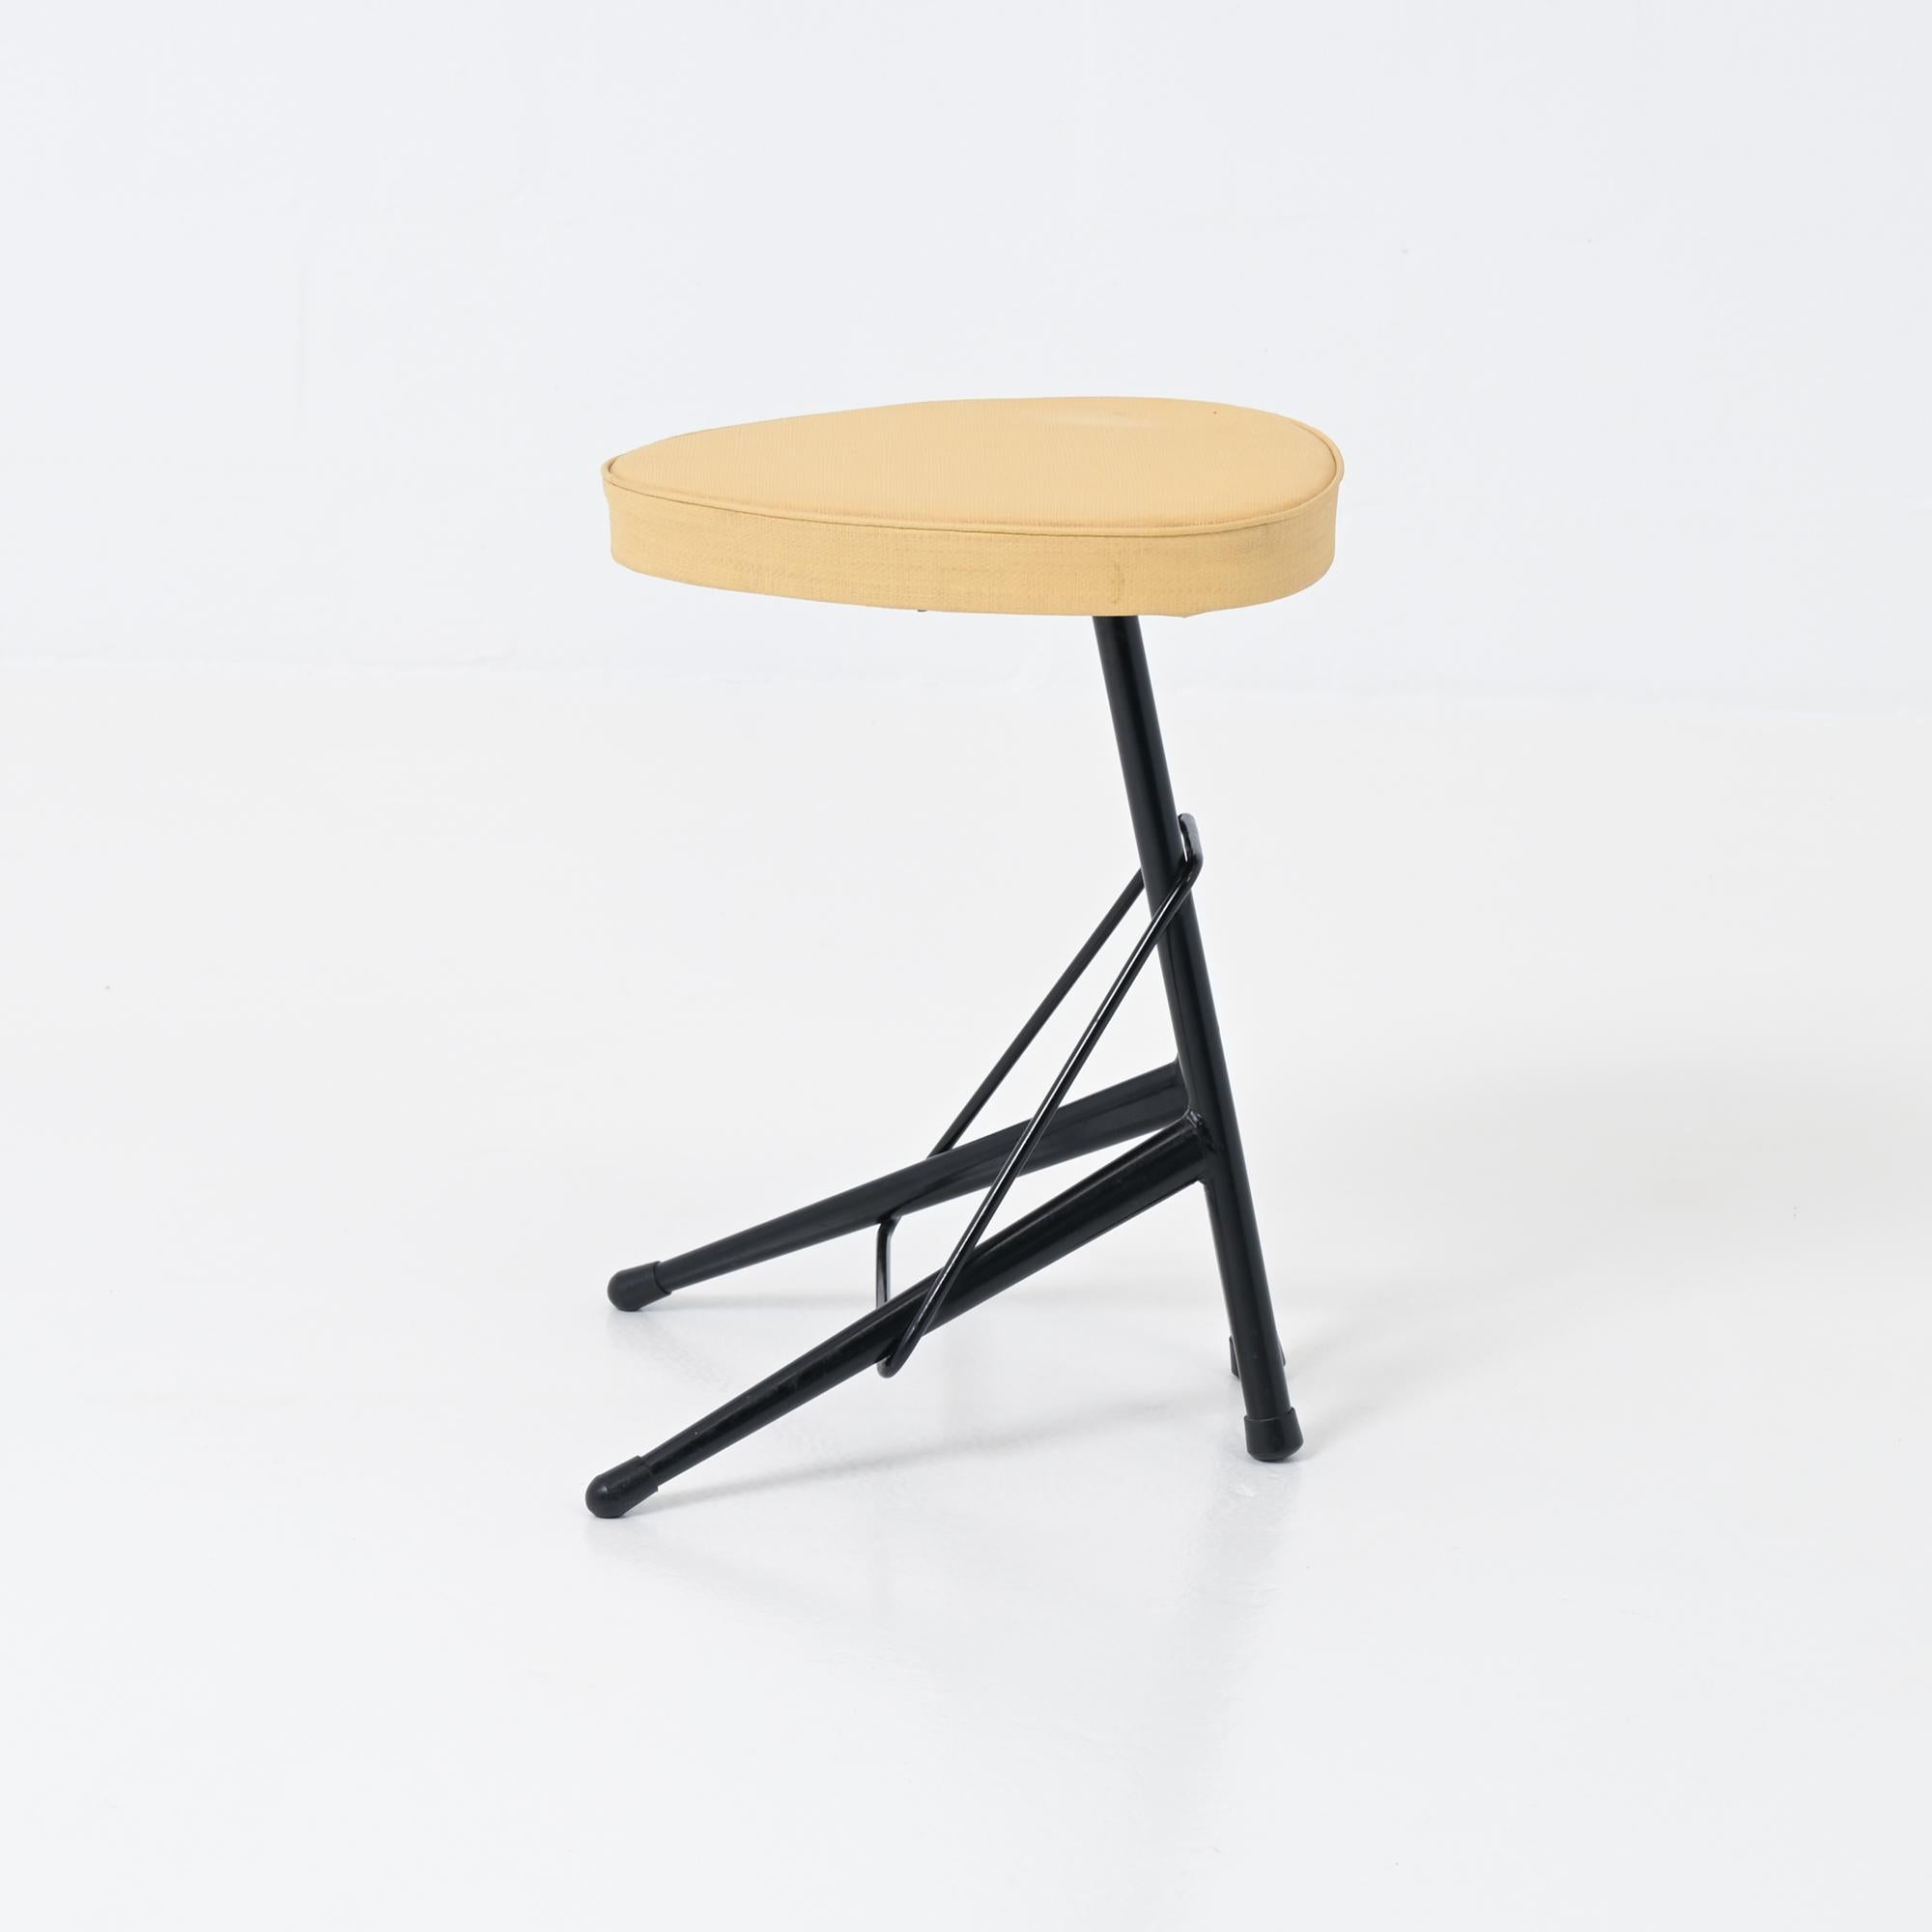 Rare industrial stool designed by Willy van der Meeren, manufactured by Tubax ca 1950. This stool has a black lacquered tubular metal frame and original yellow vynil upholstery.

The stool is in perfect condition.

A must have for a Willy Van Der